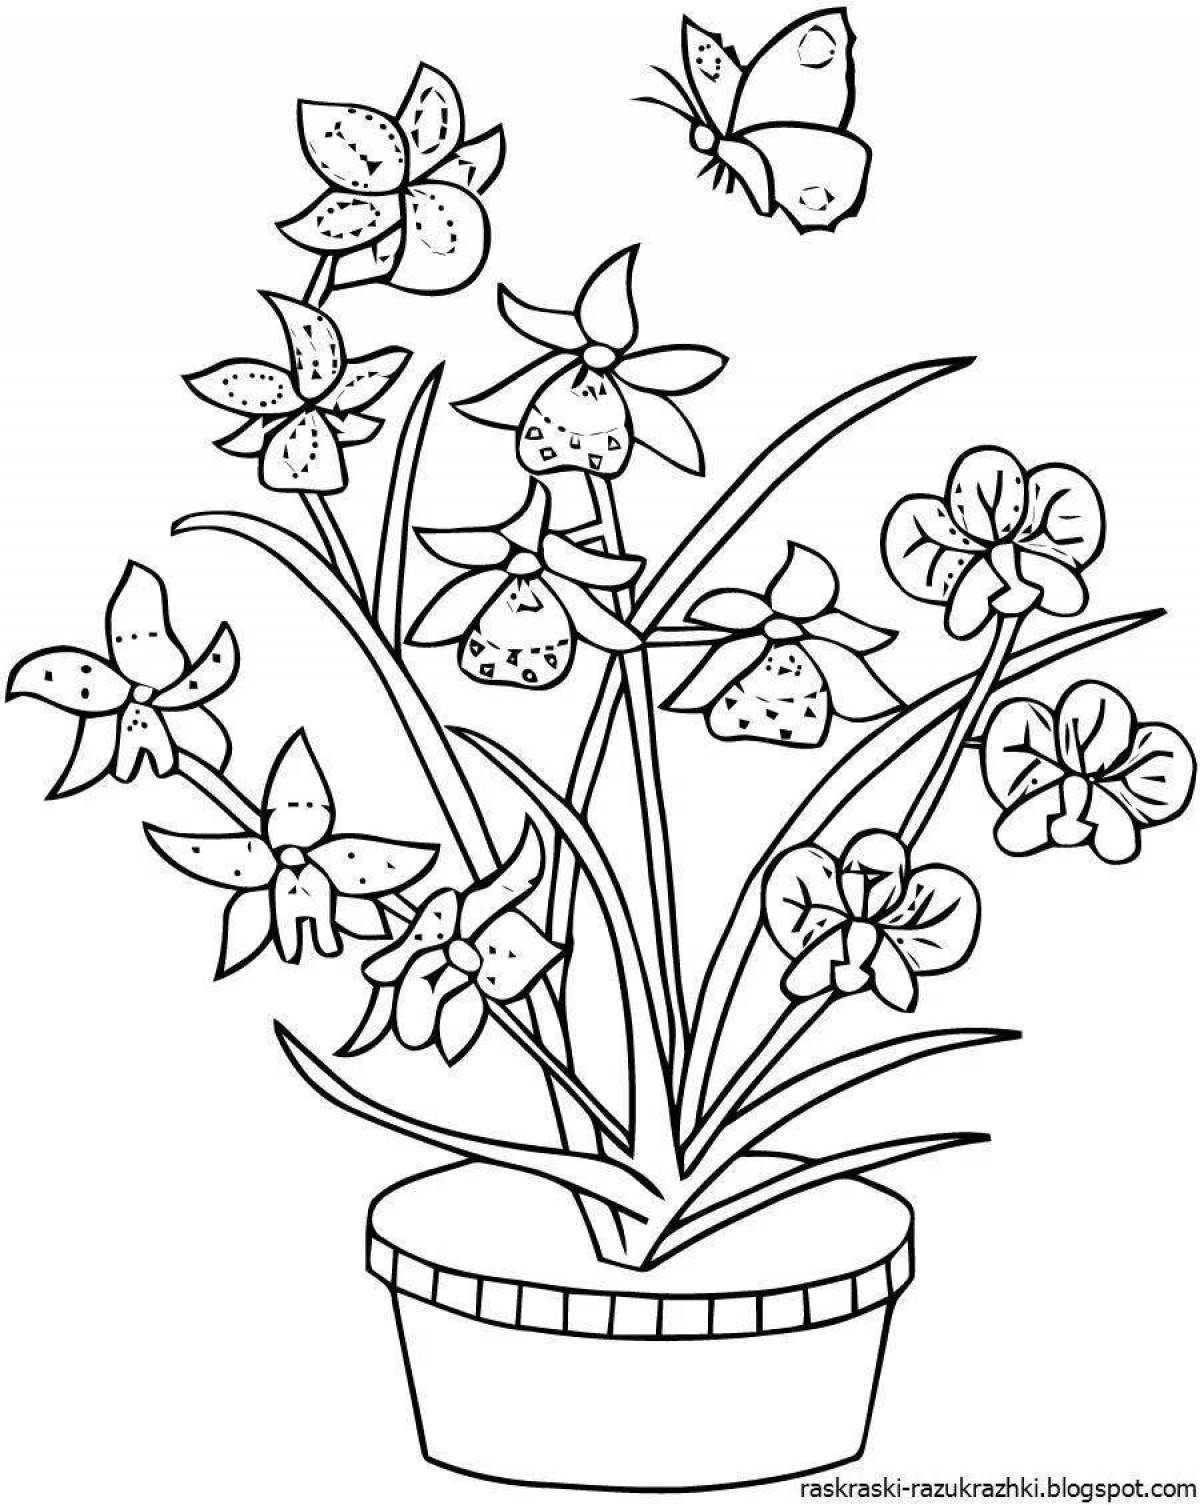 Fancy indoor plants coloring book for 6-7 year olds